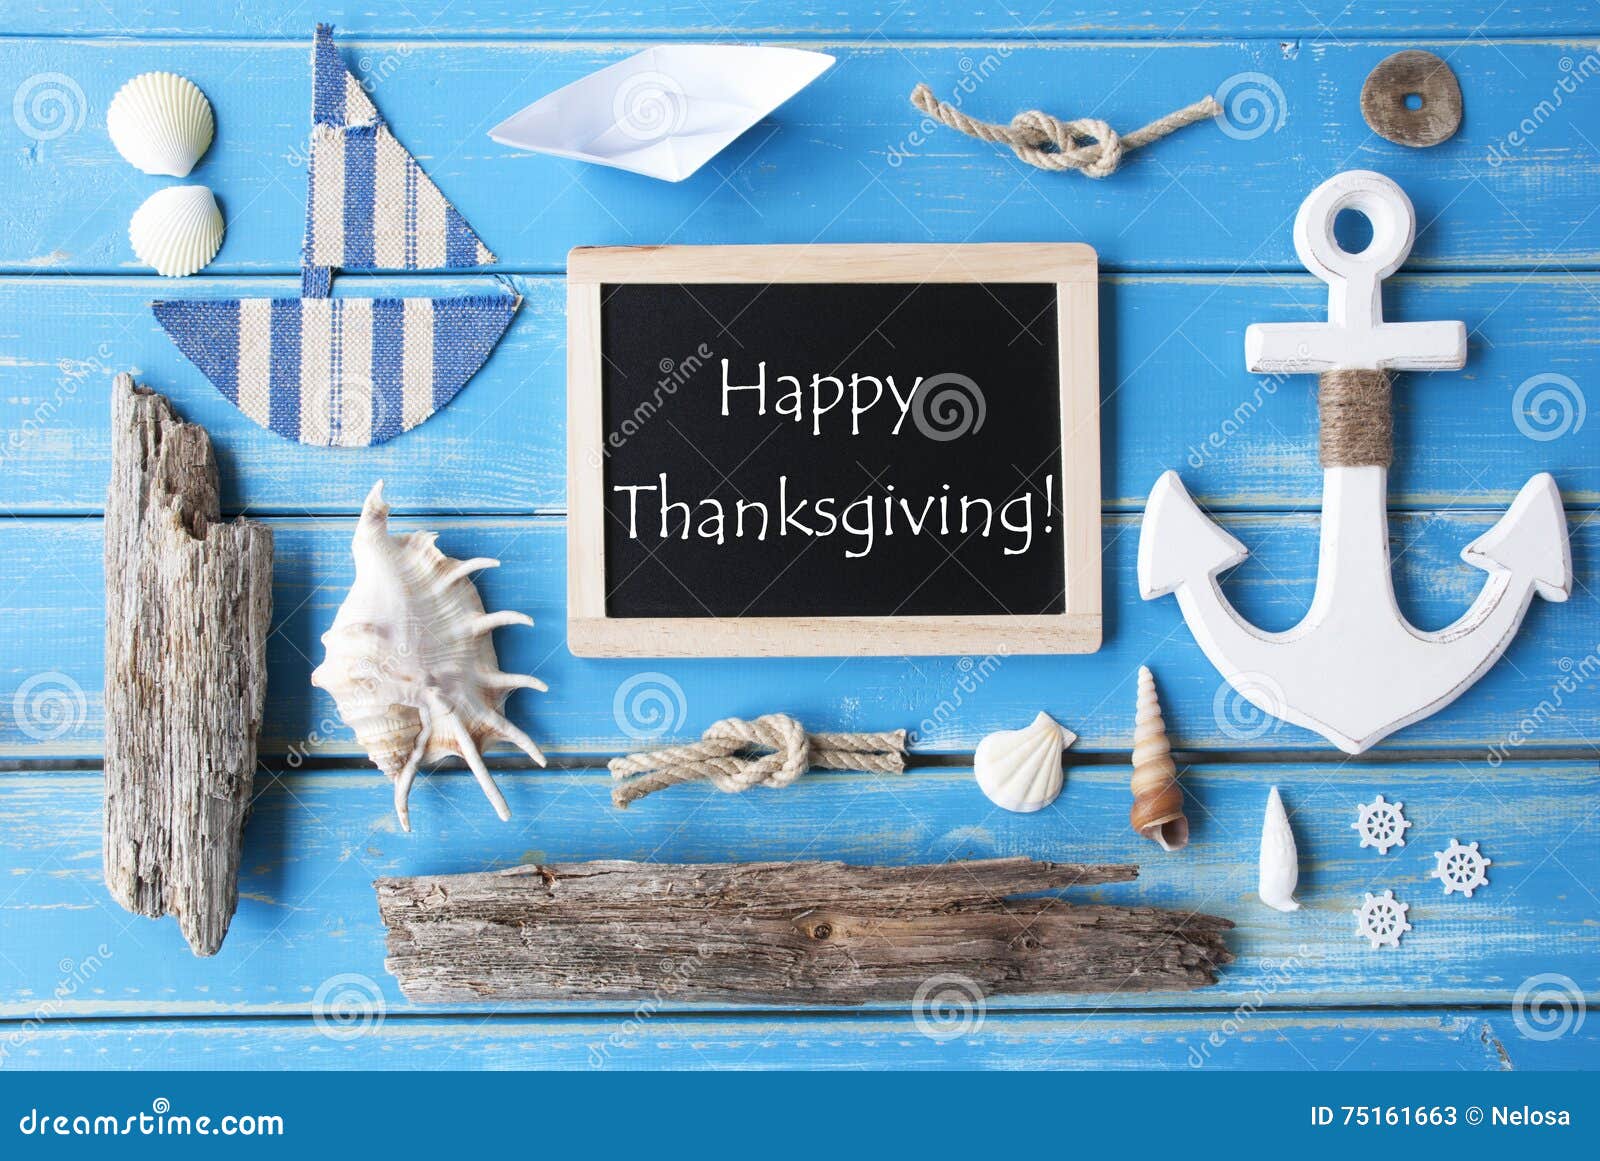 nautic chalkboard and text happy thanksgiving